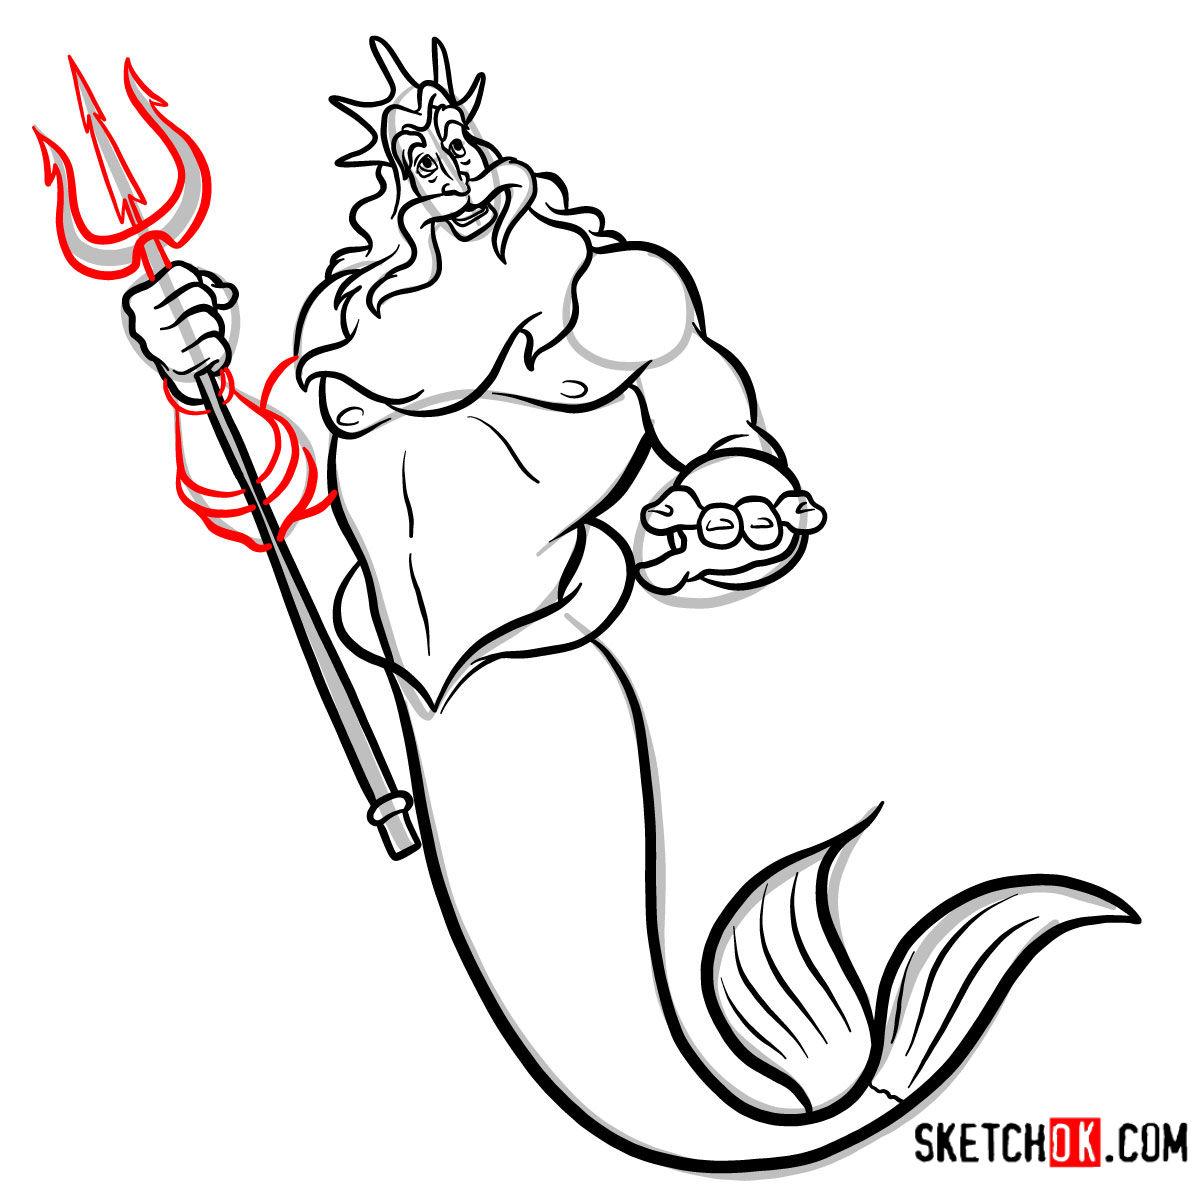 How to draw King Triton | The Little Mermaid - step 11